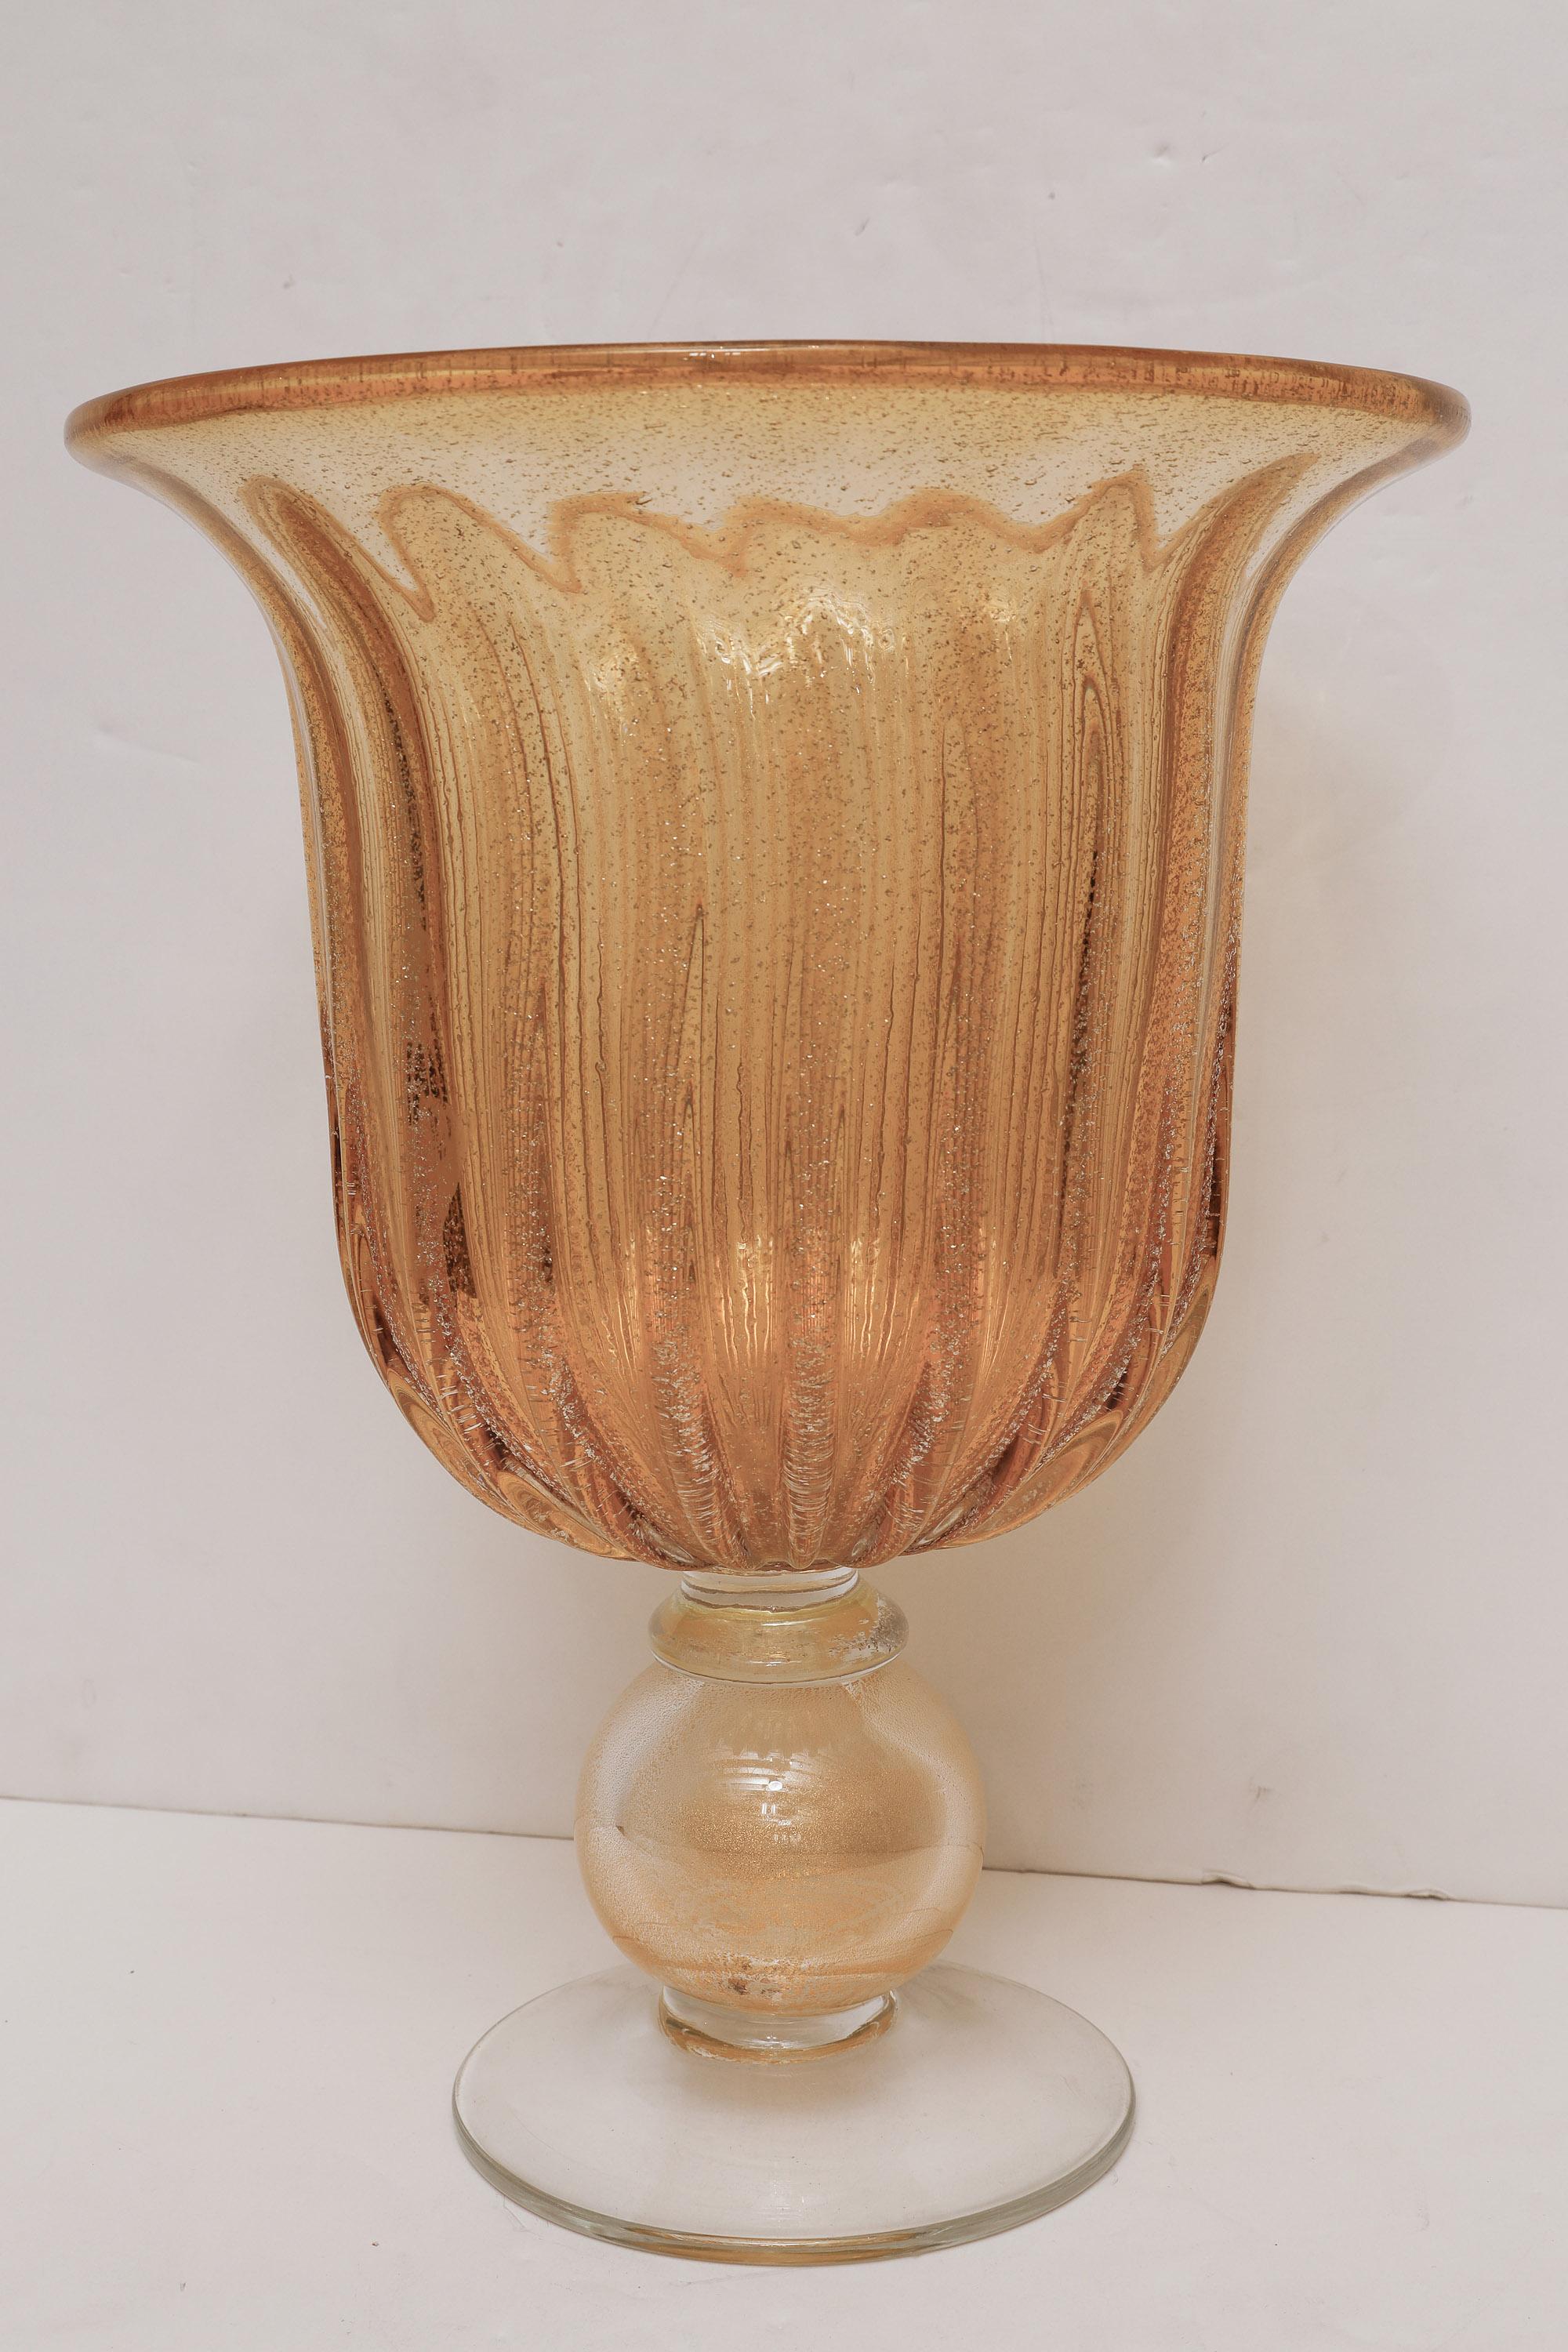 Beautiful hand blown fluted Murano vase in the style of Angelo Seguso, executed in amber and clear glass with gold dust and sparkling inclusions.
Large in scale - perfect statement piece!.